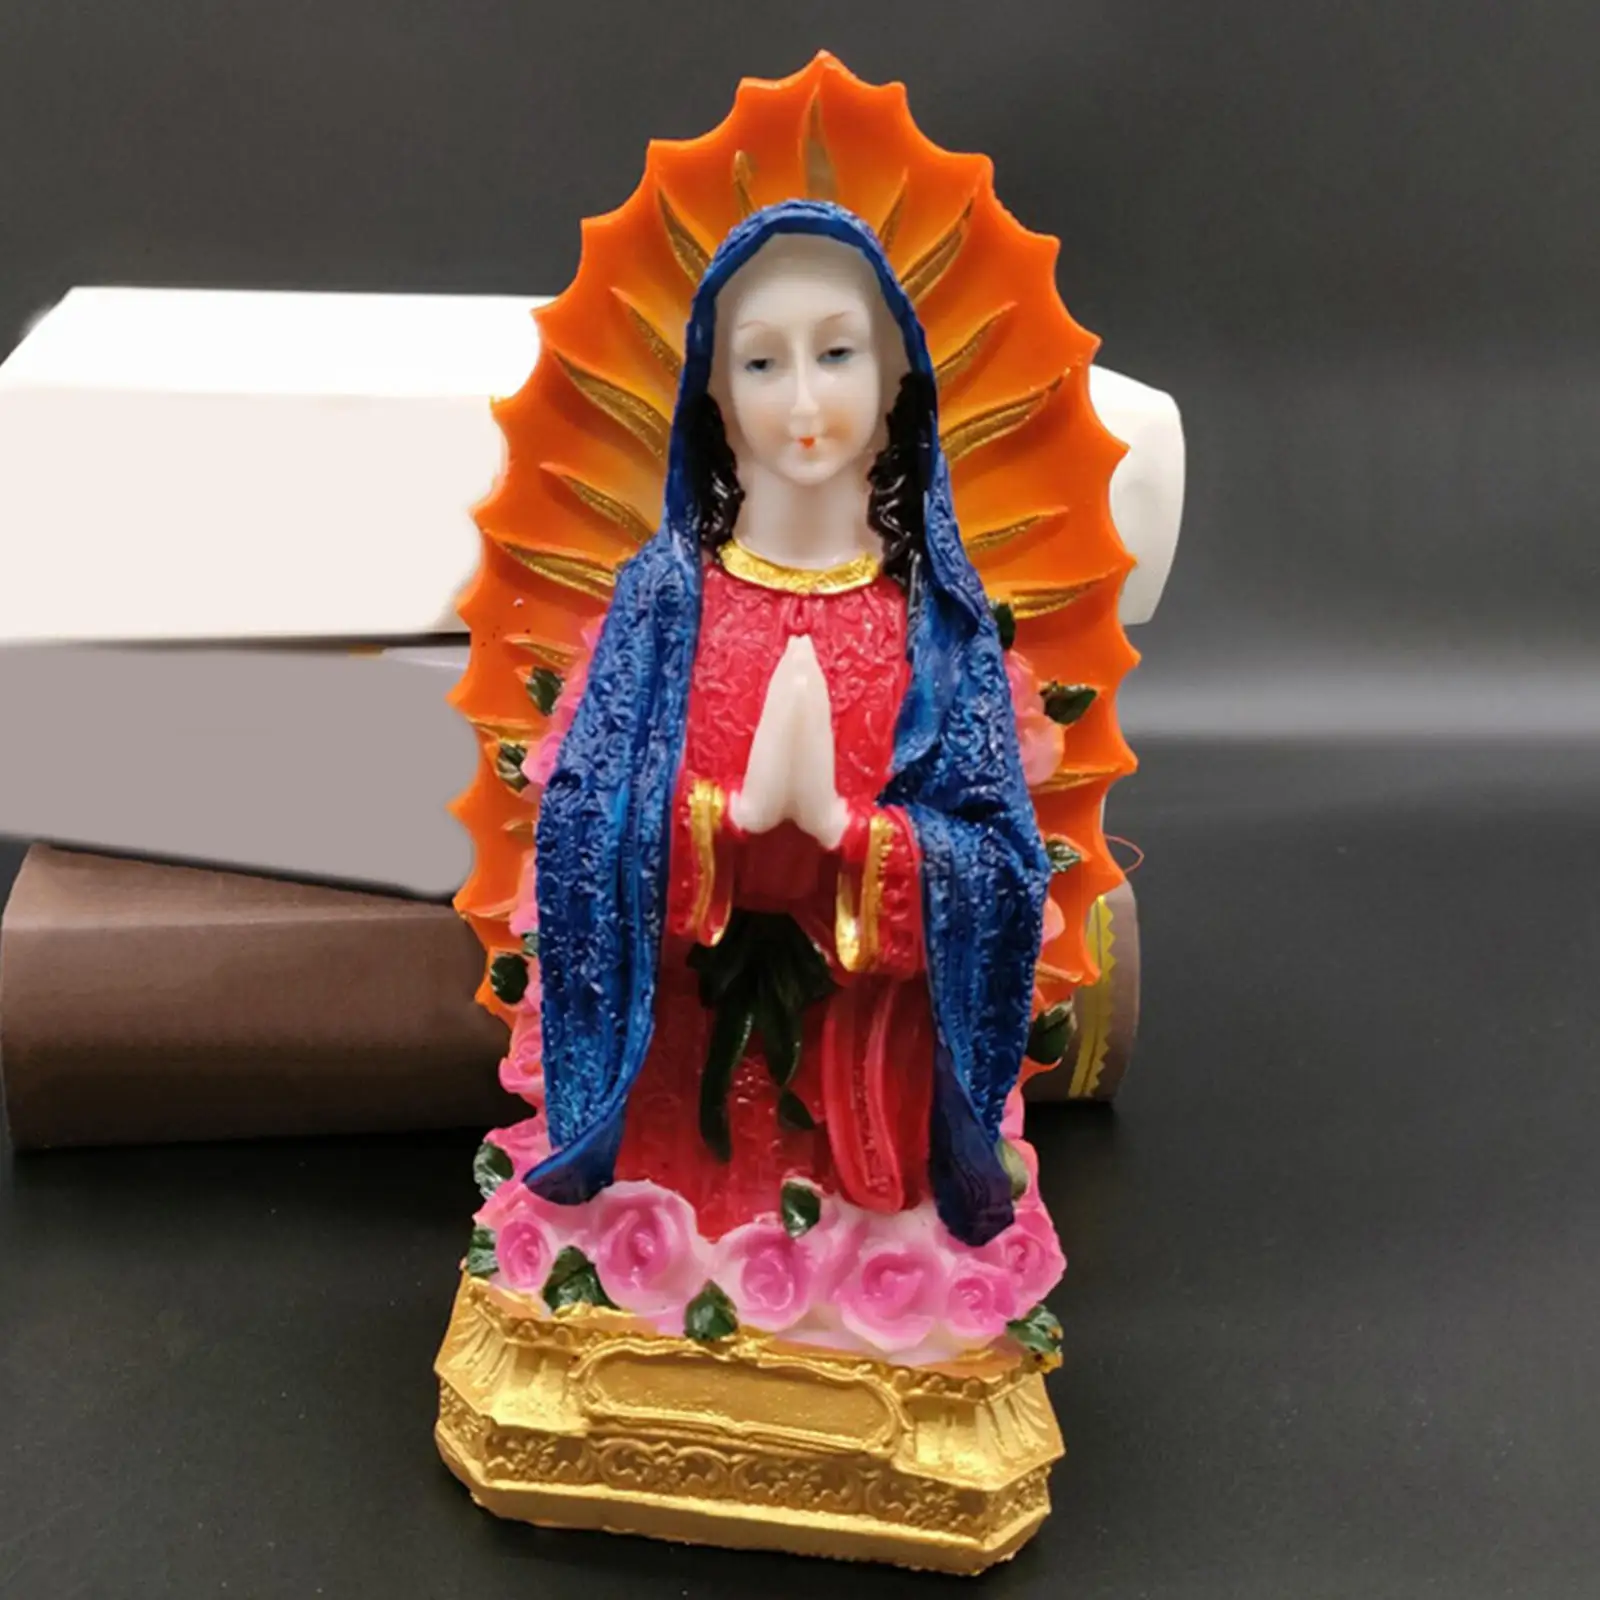 Our Lady Virgin Mary Figurine Collection Praying Christian Statue Sculpture for Garden Desktop Office Indoor Decoration